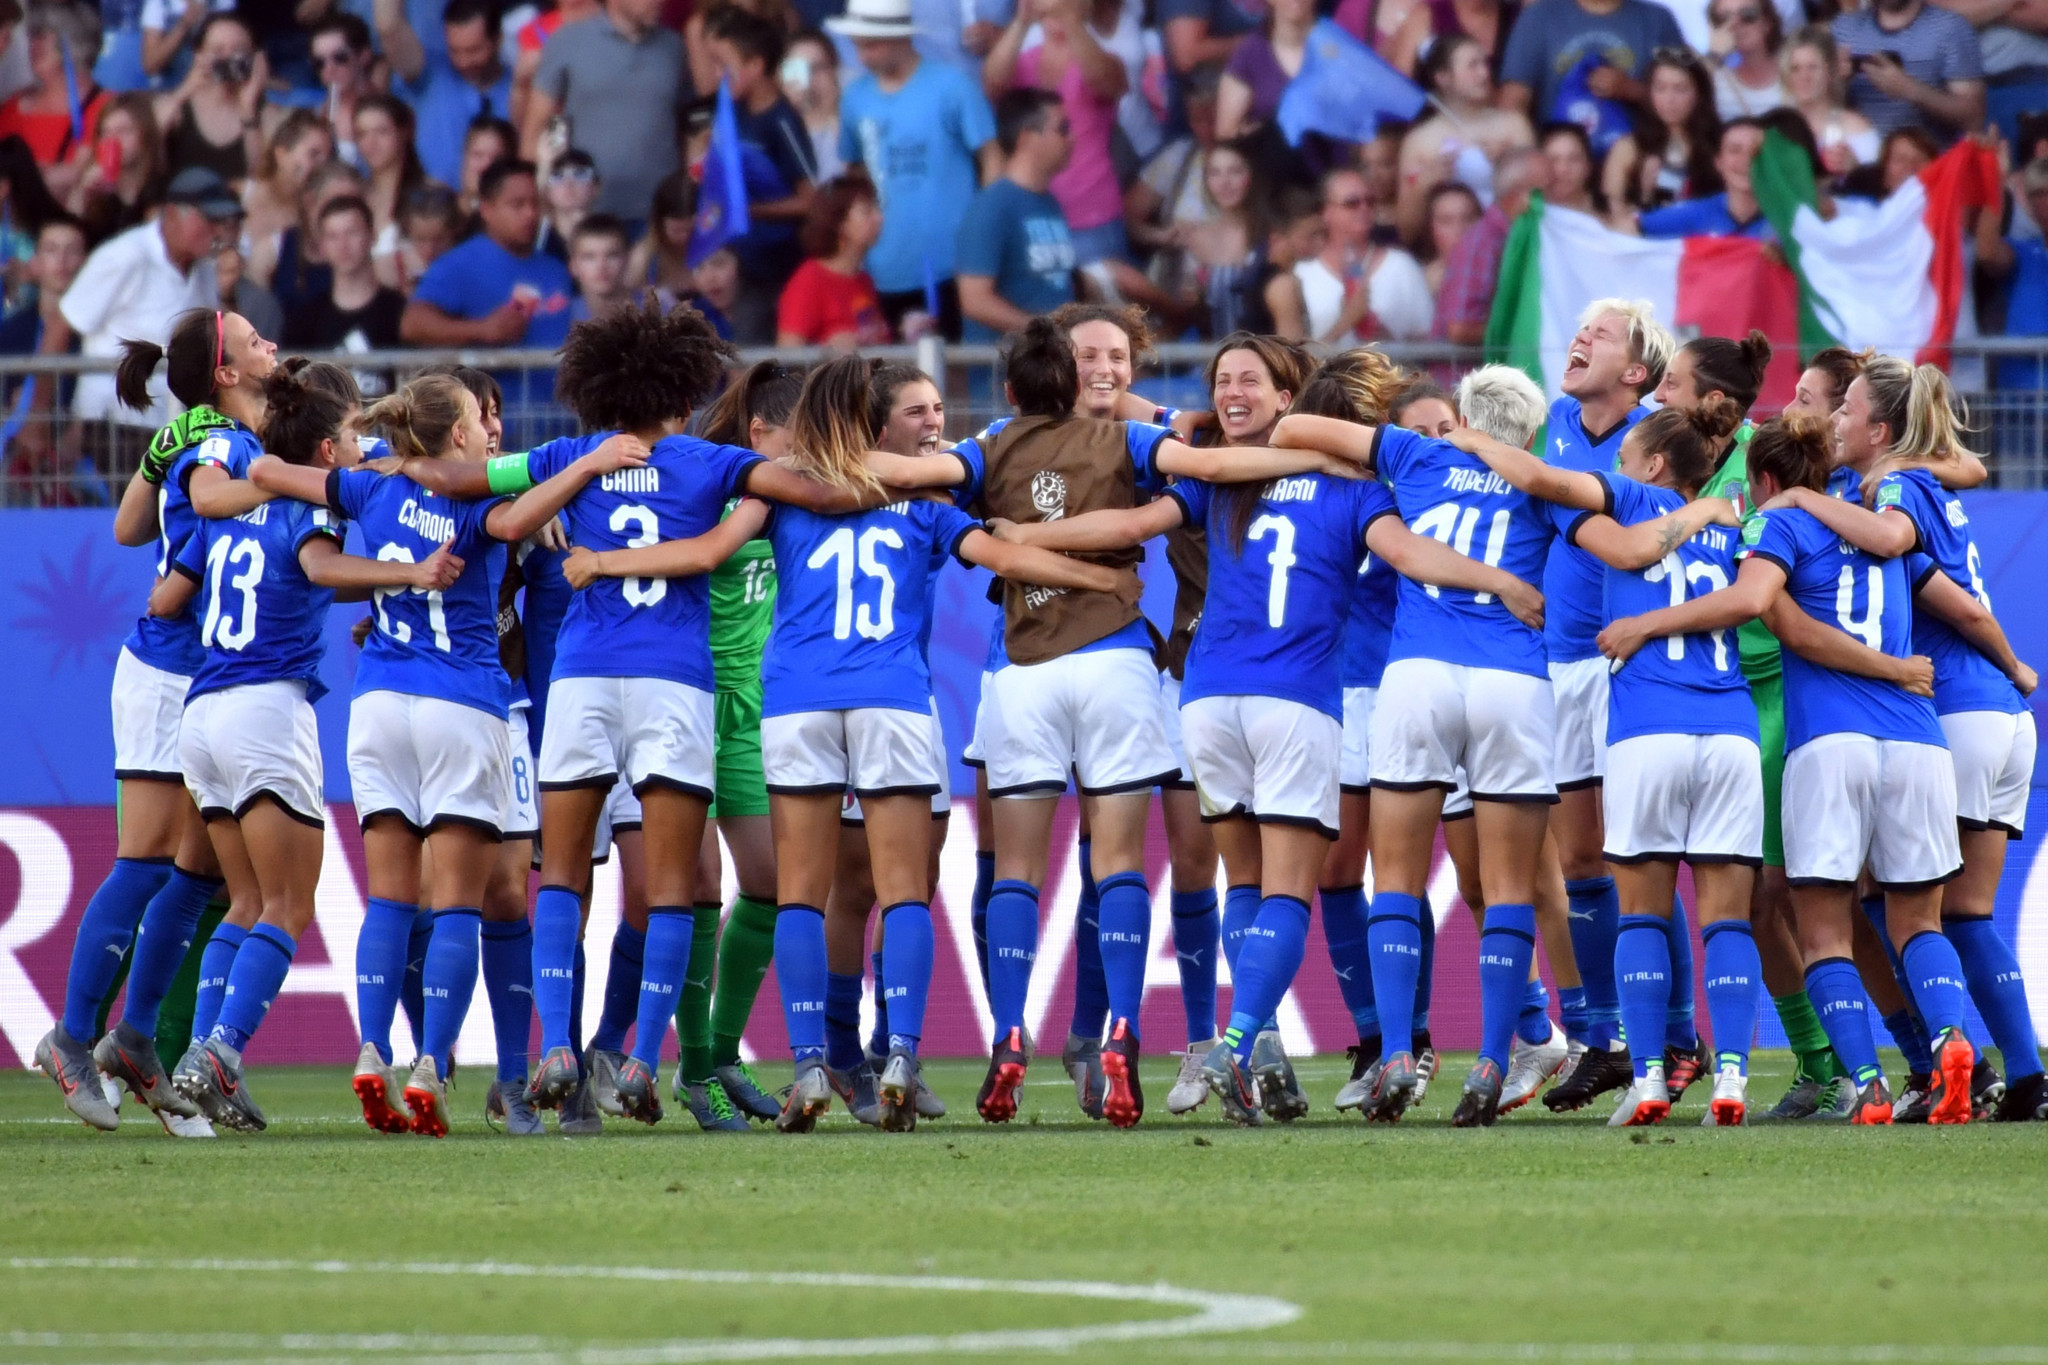 Italy booked their place in the FIFA Women's World Cup quarter-finals with a goal in each half to beat China in Montpellier ©Getty Images